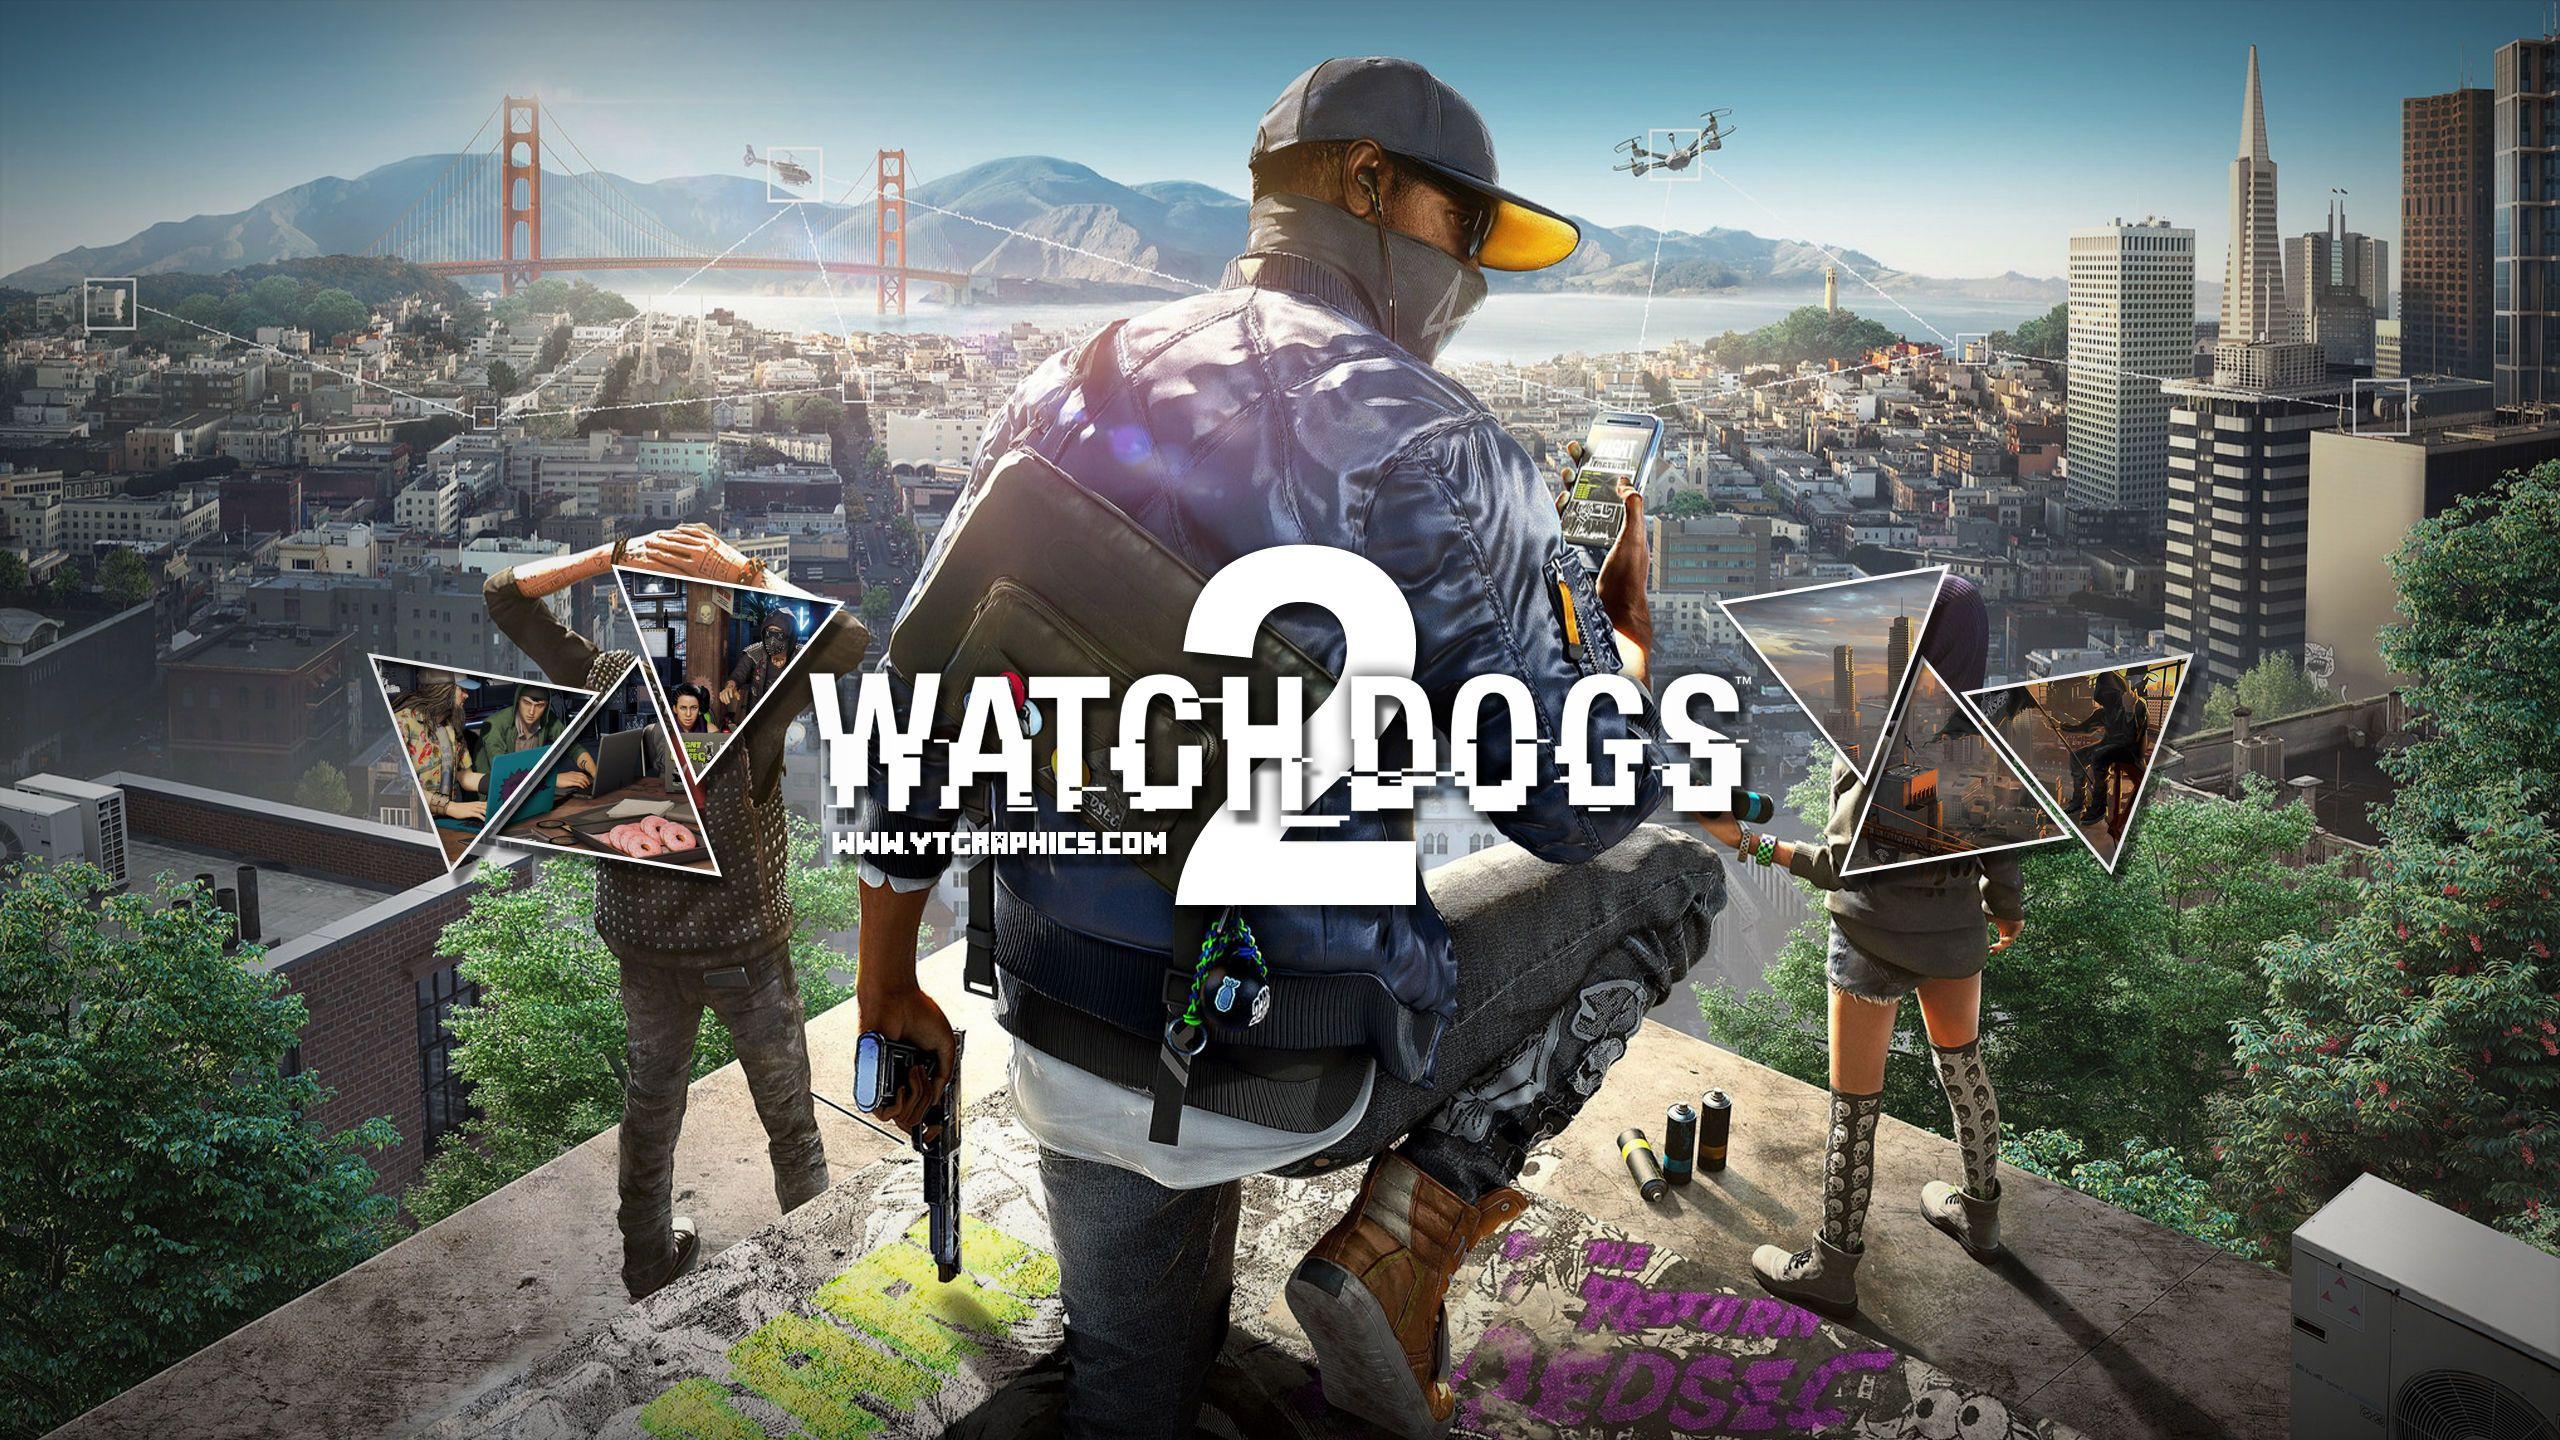 Watch dogs video game wallpapers